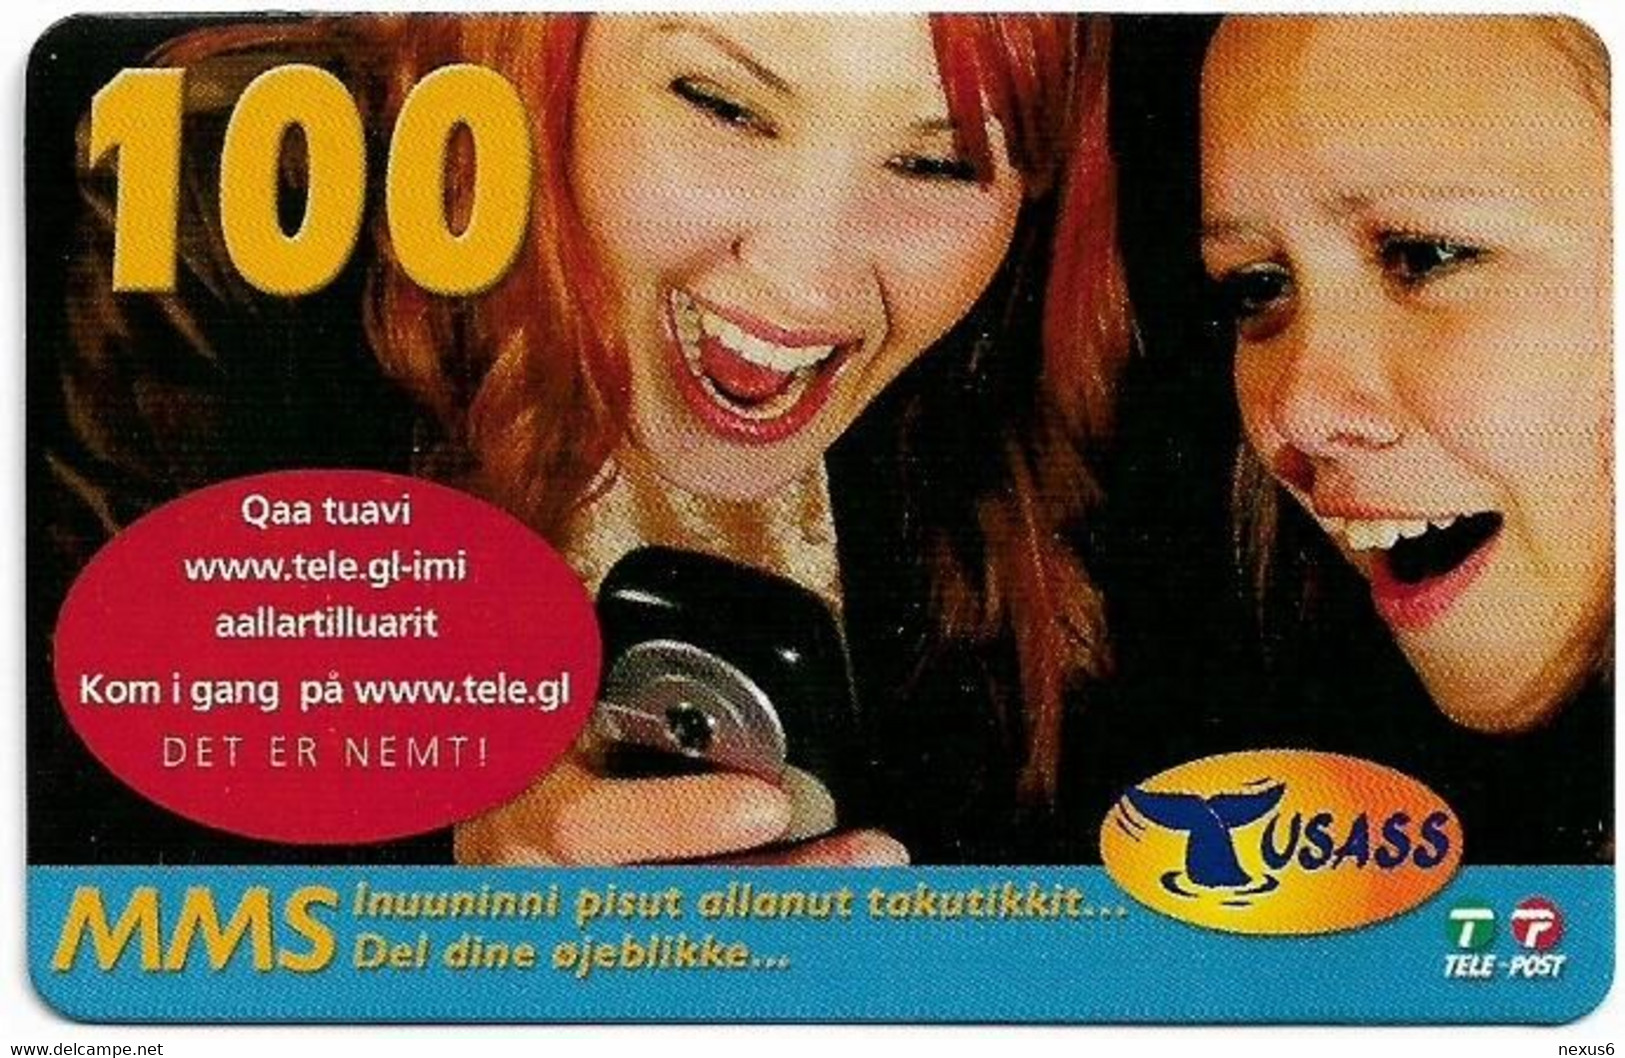 Greenland - Tusass - 2 Girls With Mobile, GSM Refill, 100kr. Exp. 17.05.2009, Used - Groenlandia